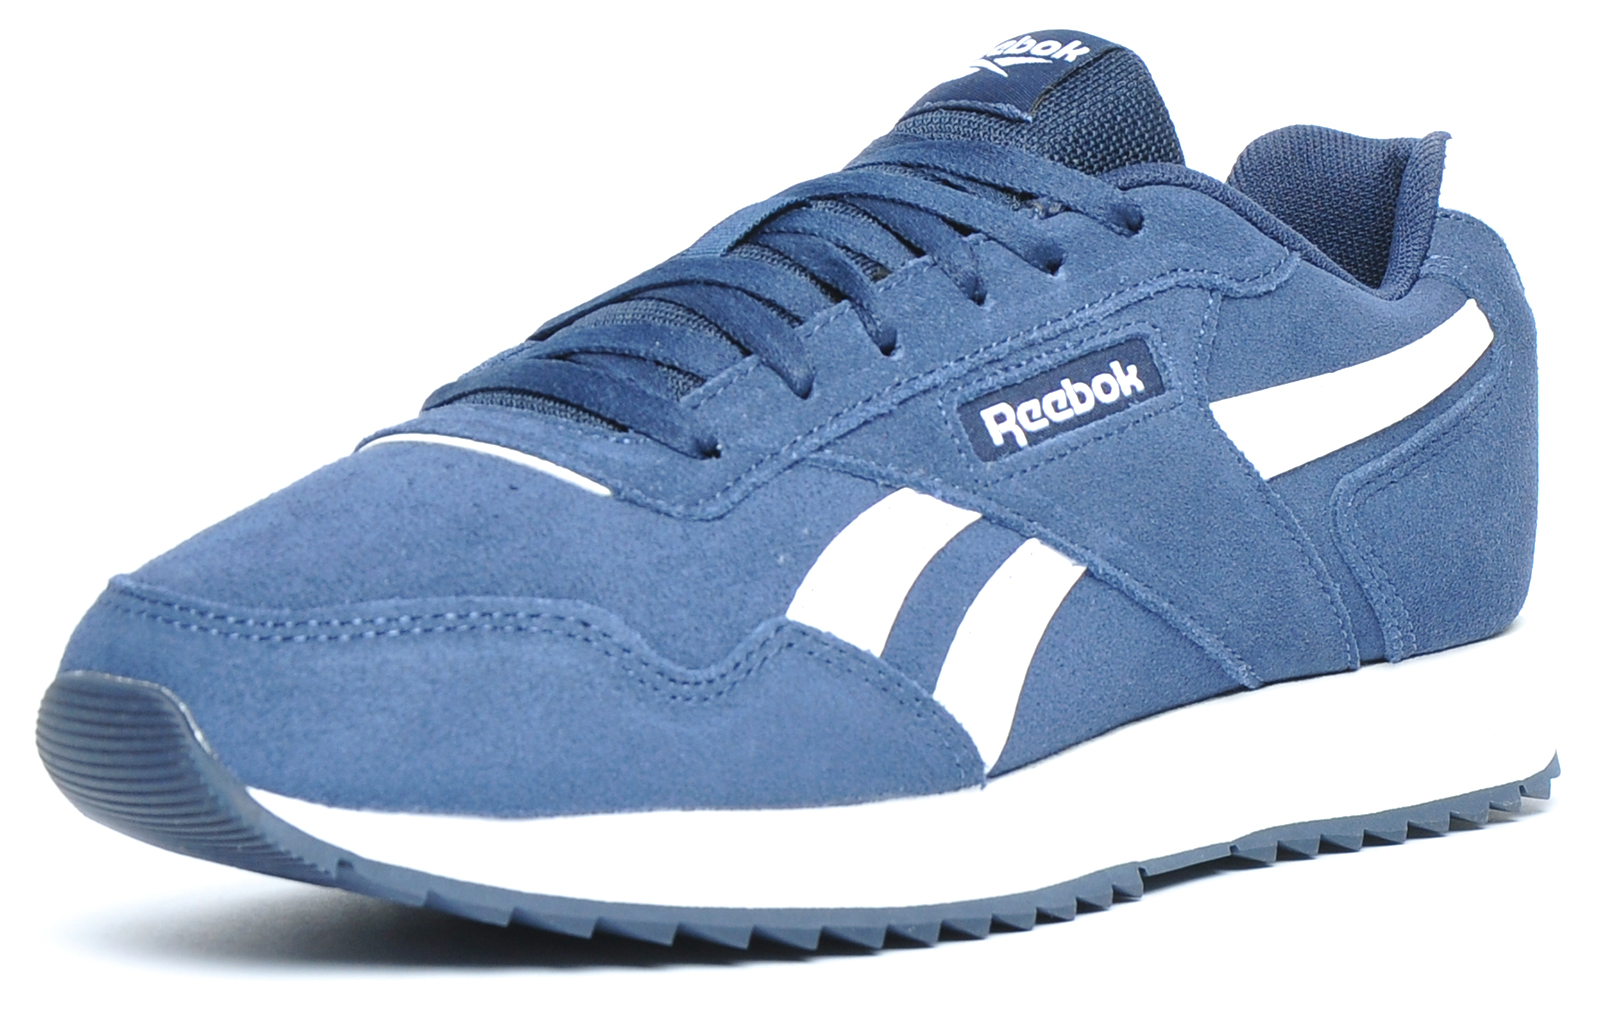 Reebok Classic Glide Ripple Suede Trainers